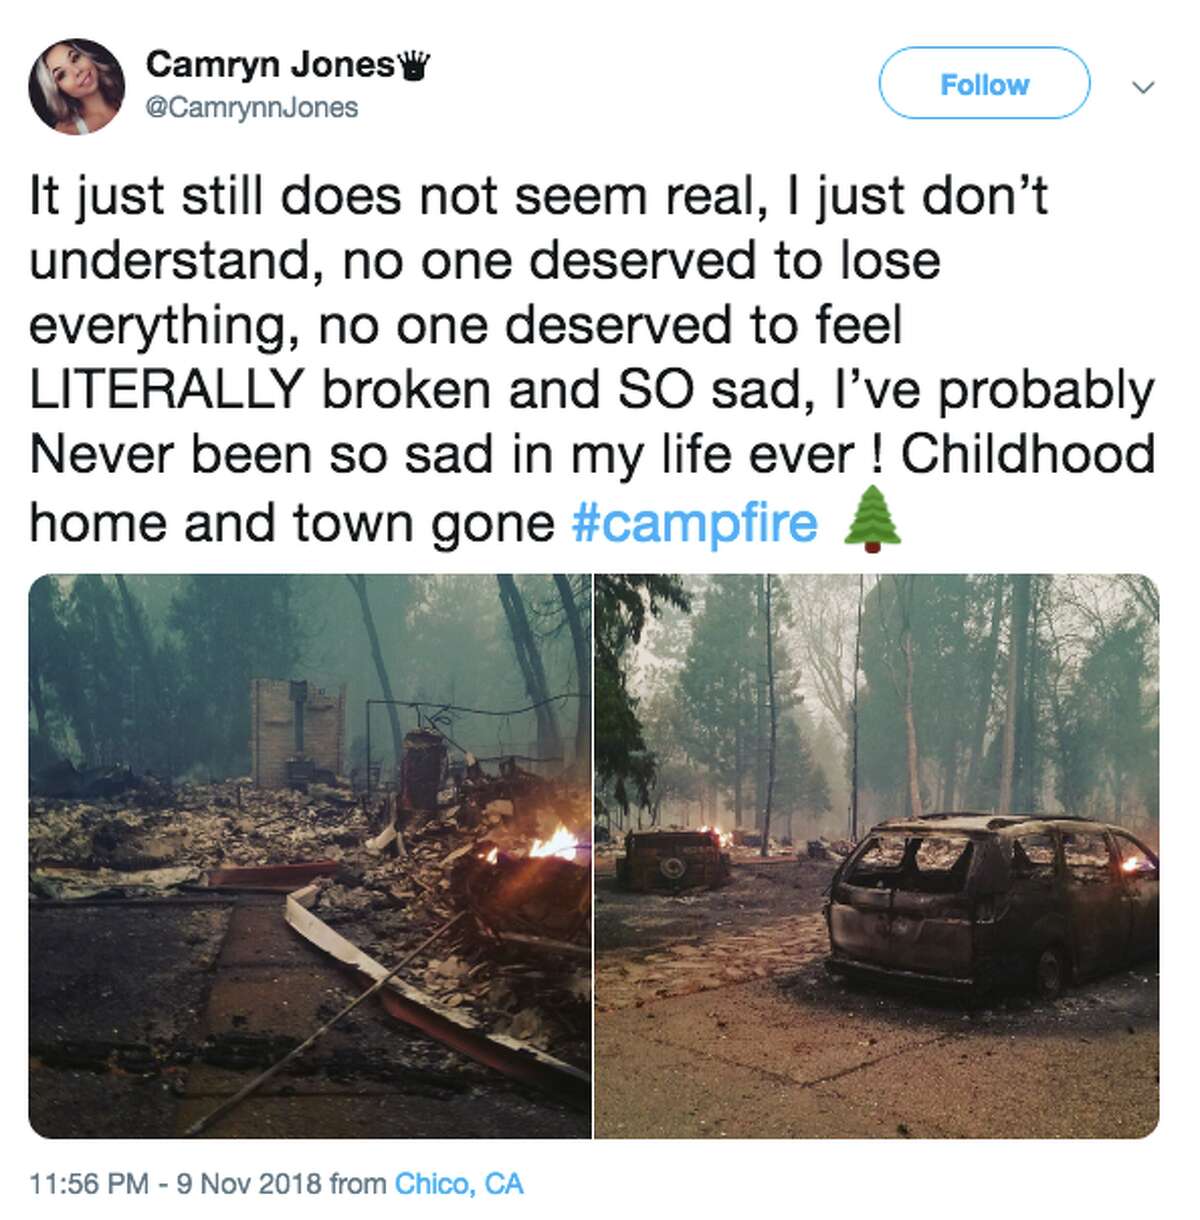 @CamrynnJones shared a photo on Friday, Nov. 10, 2018 of her childhood home that was destroyed from the Camp Fire. 